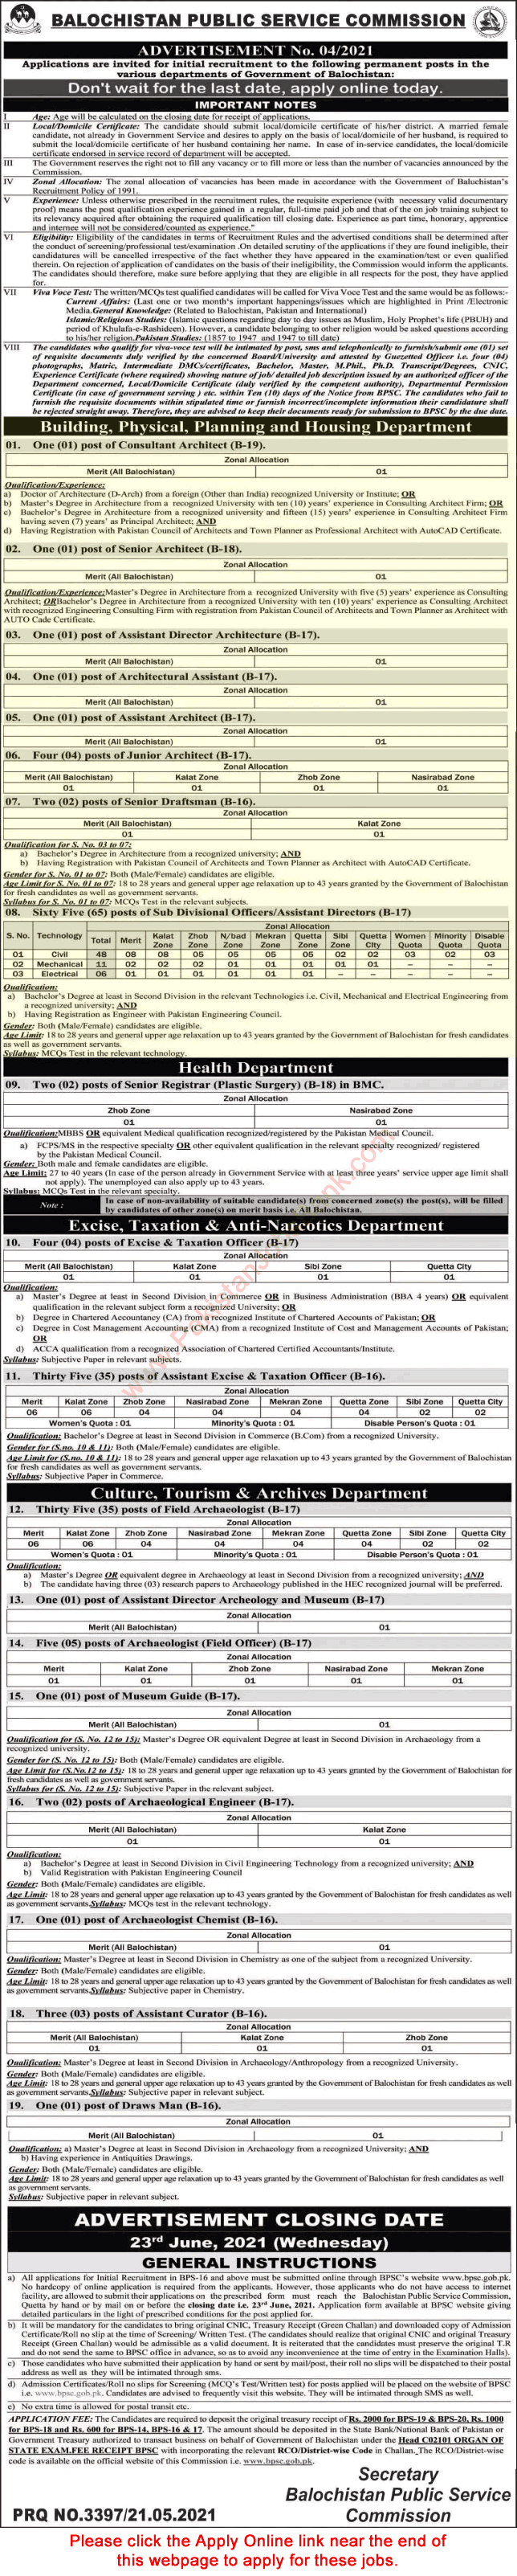 Building Physical Planning and Housing Department Balochistan Jobs 2021 May BPSC Apply Online Latest